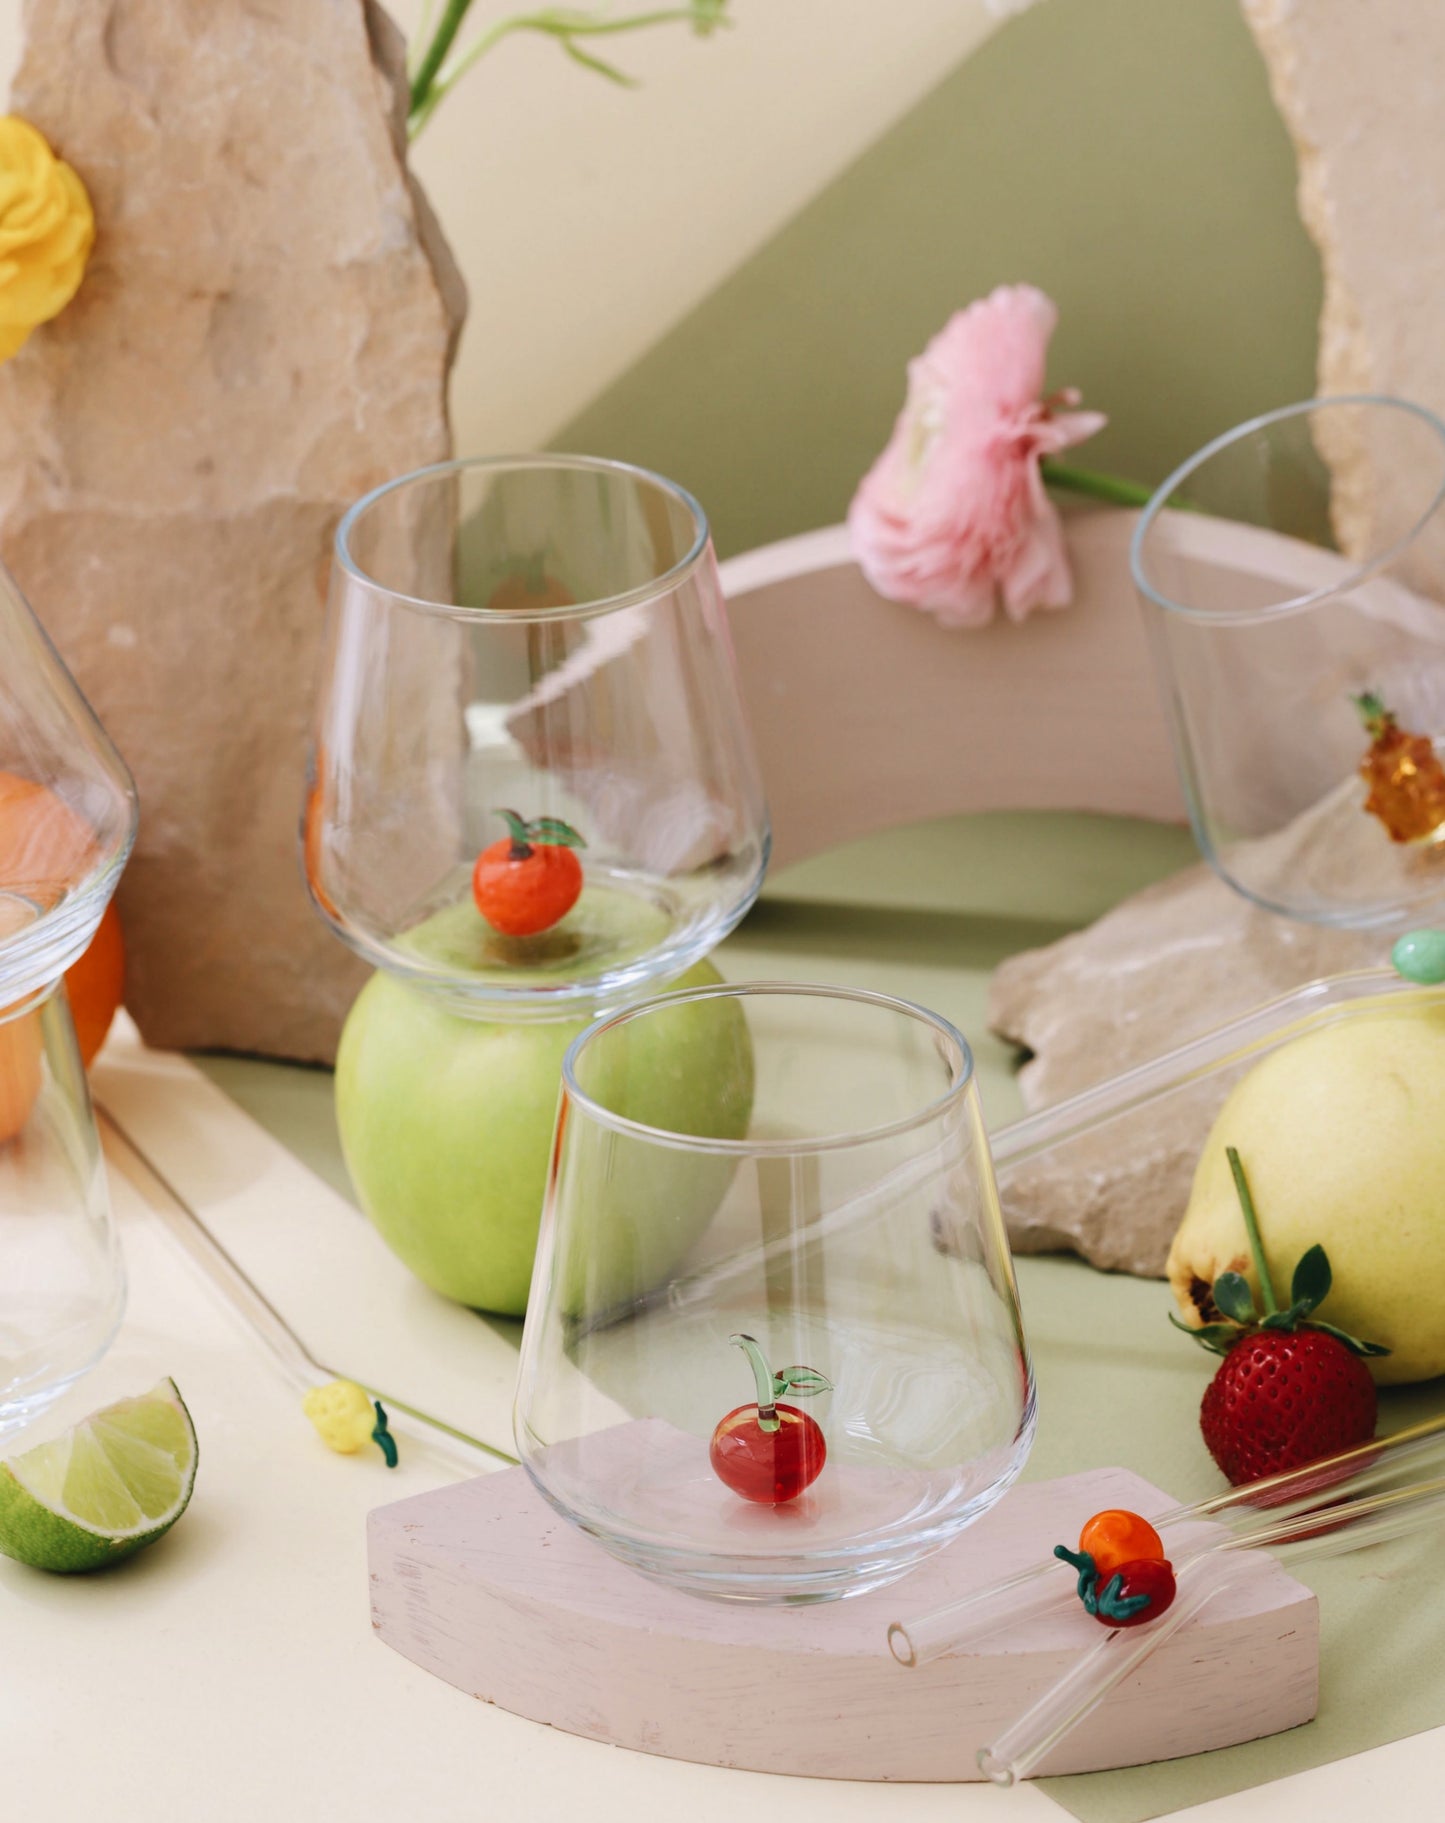 Fruit Theme Drinking Glass Set of 6 with Handmade Figures